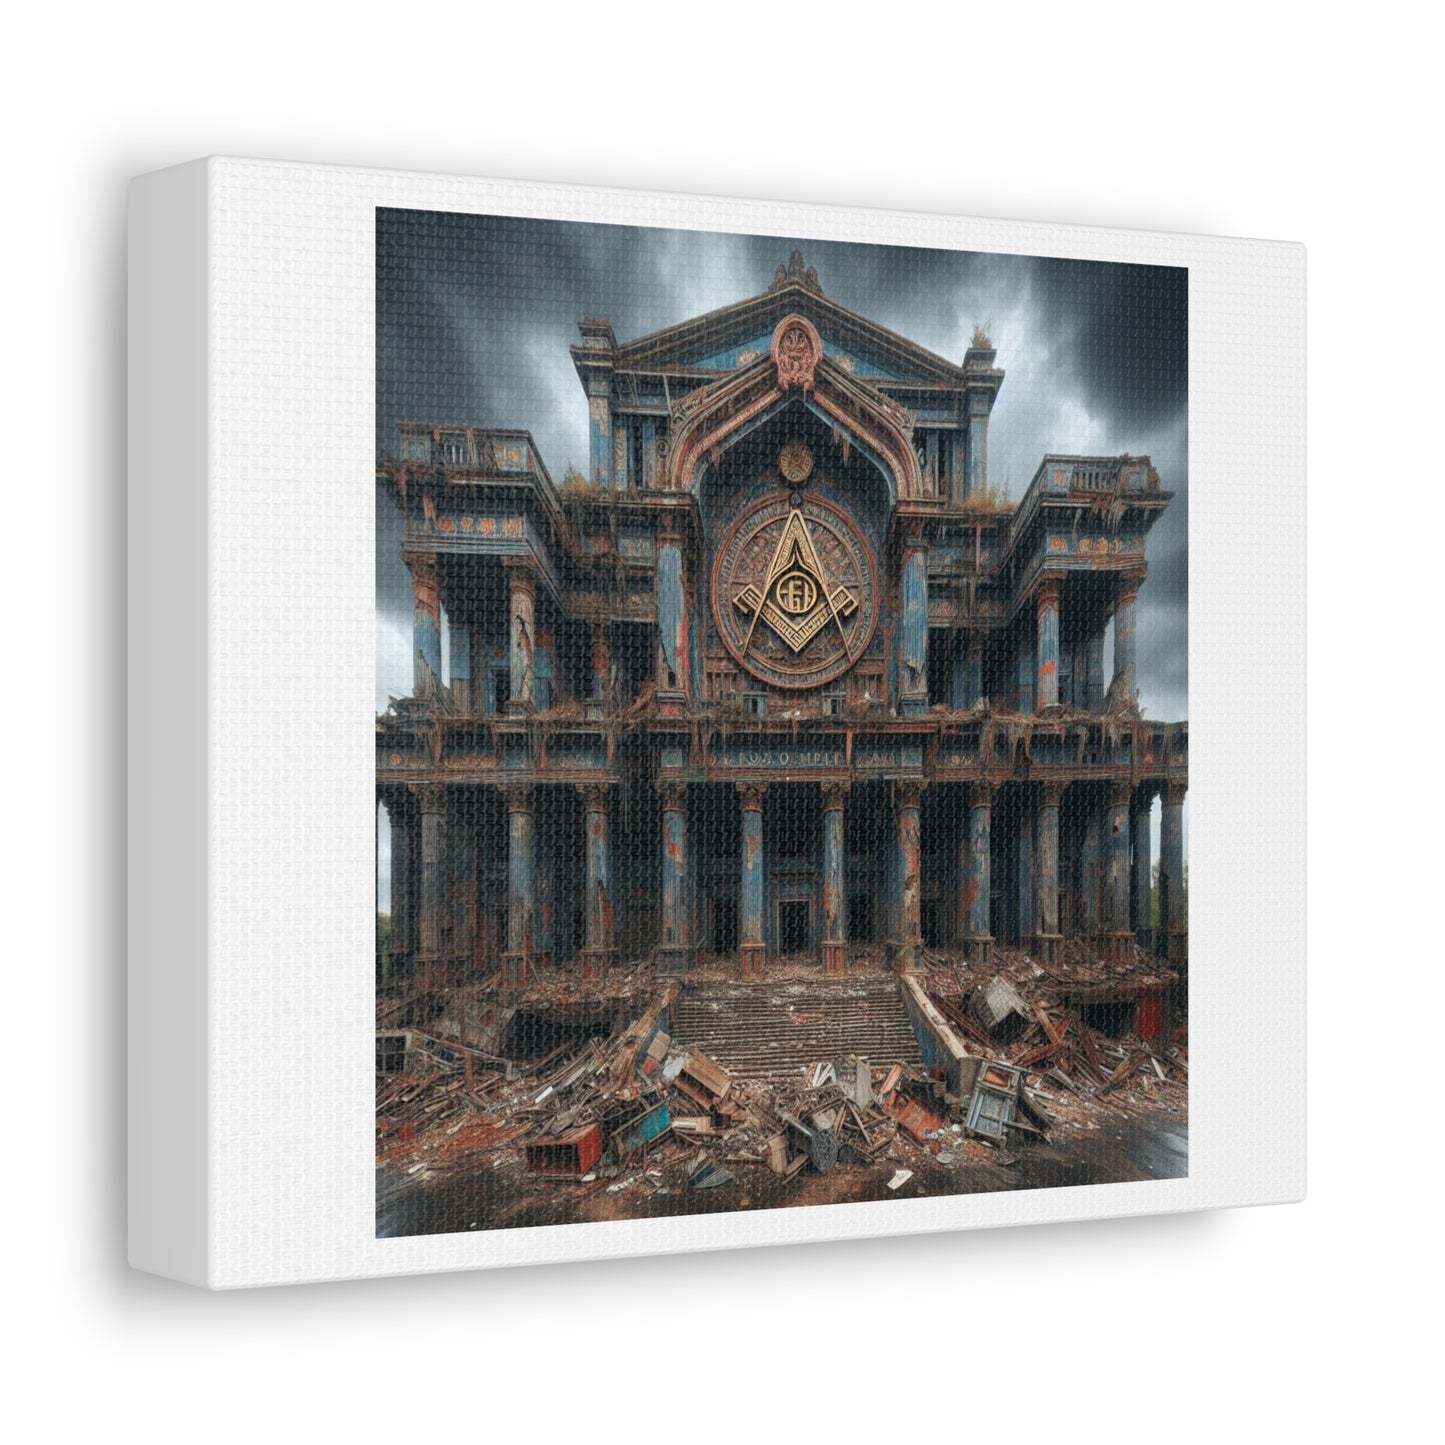 Huge Masonic Hall is Dilapidated and Falling Down, Art Print 'Designed by AI' on Canvas